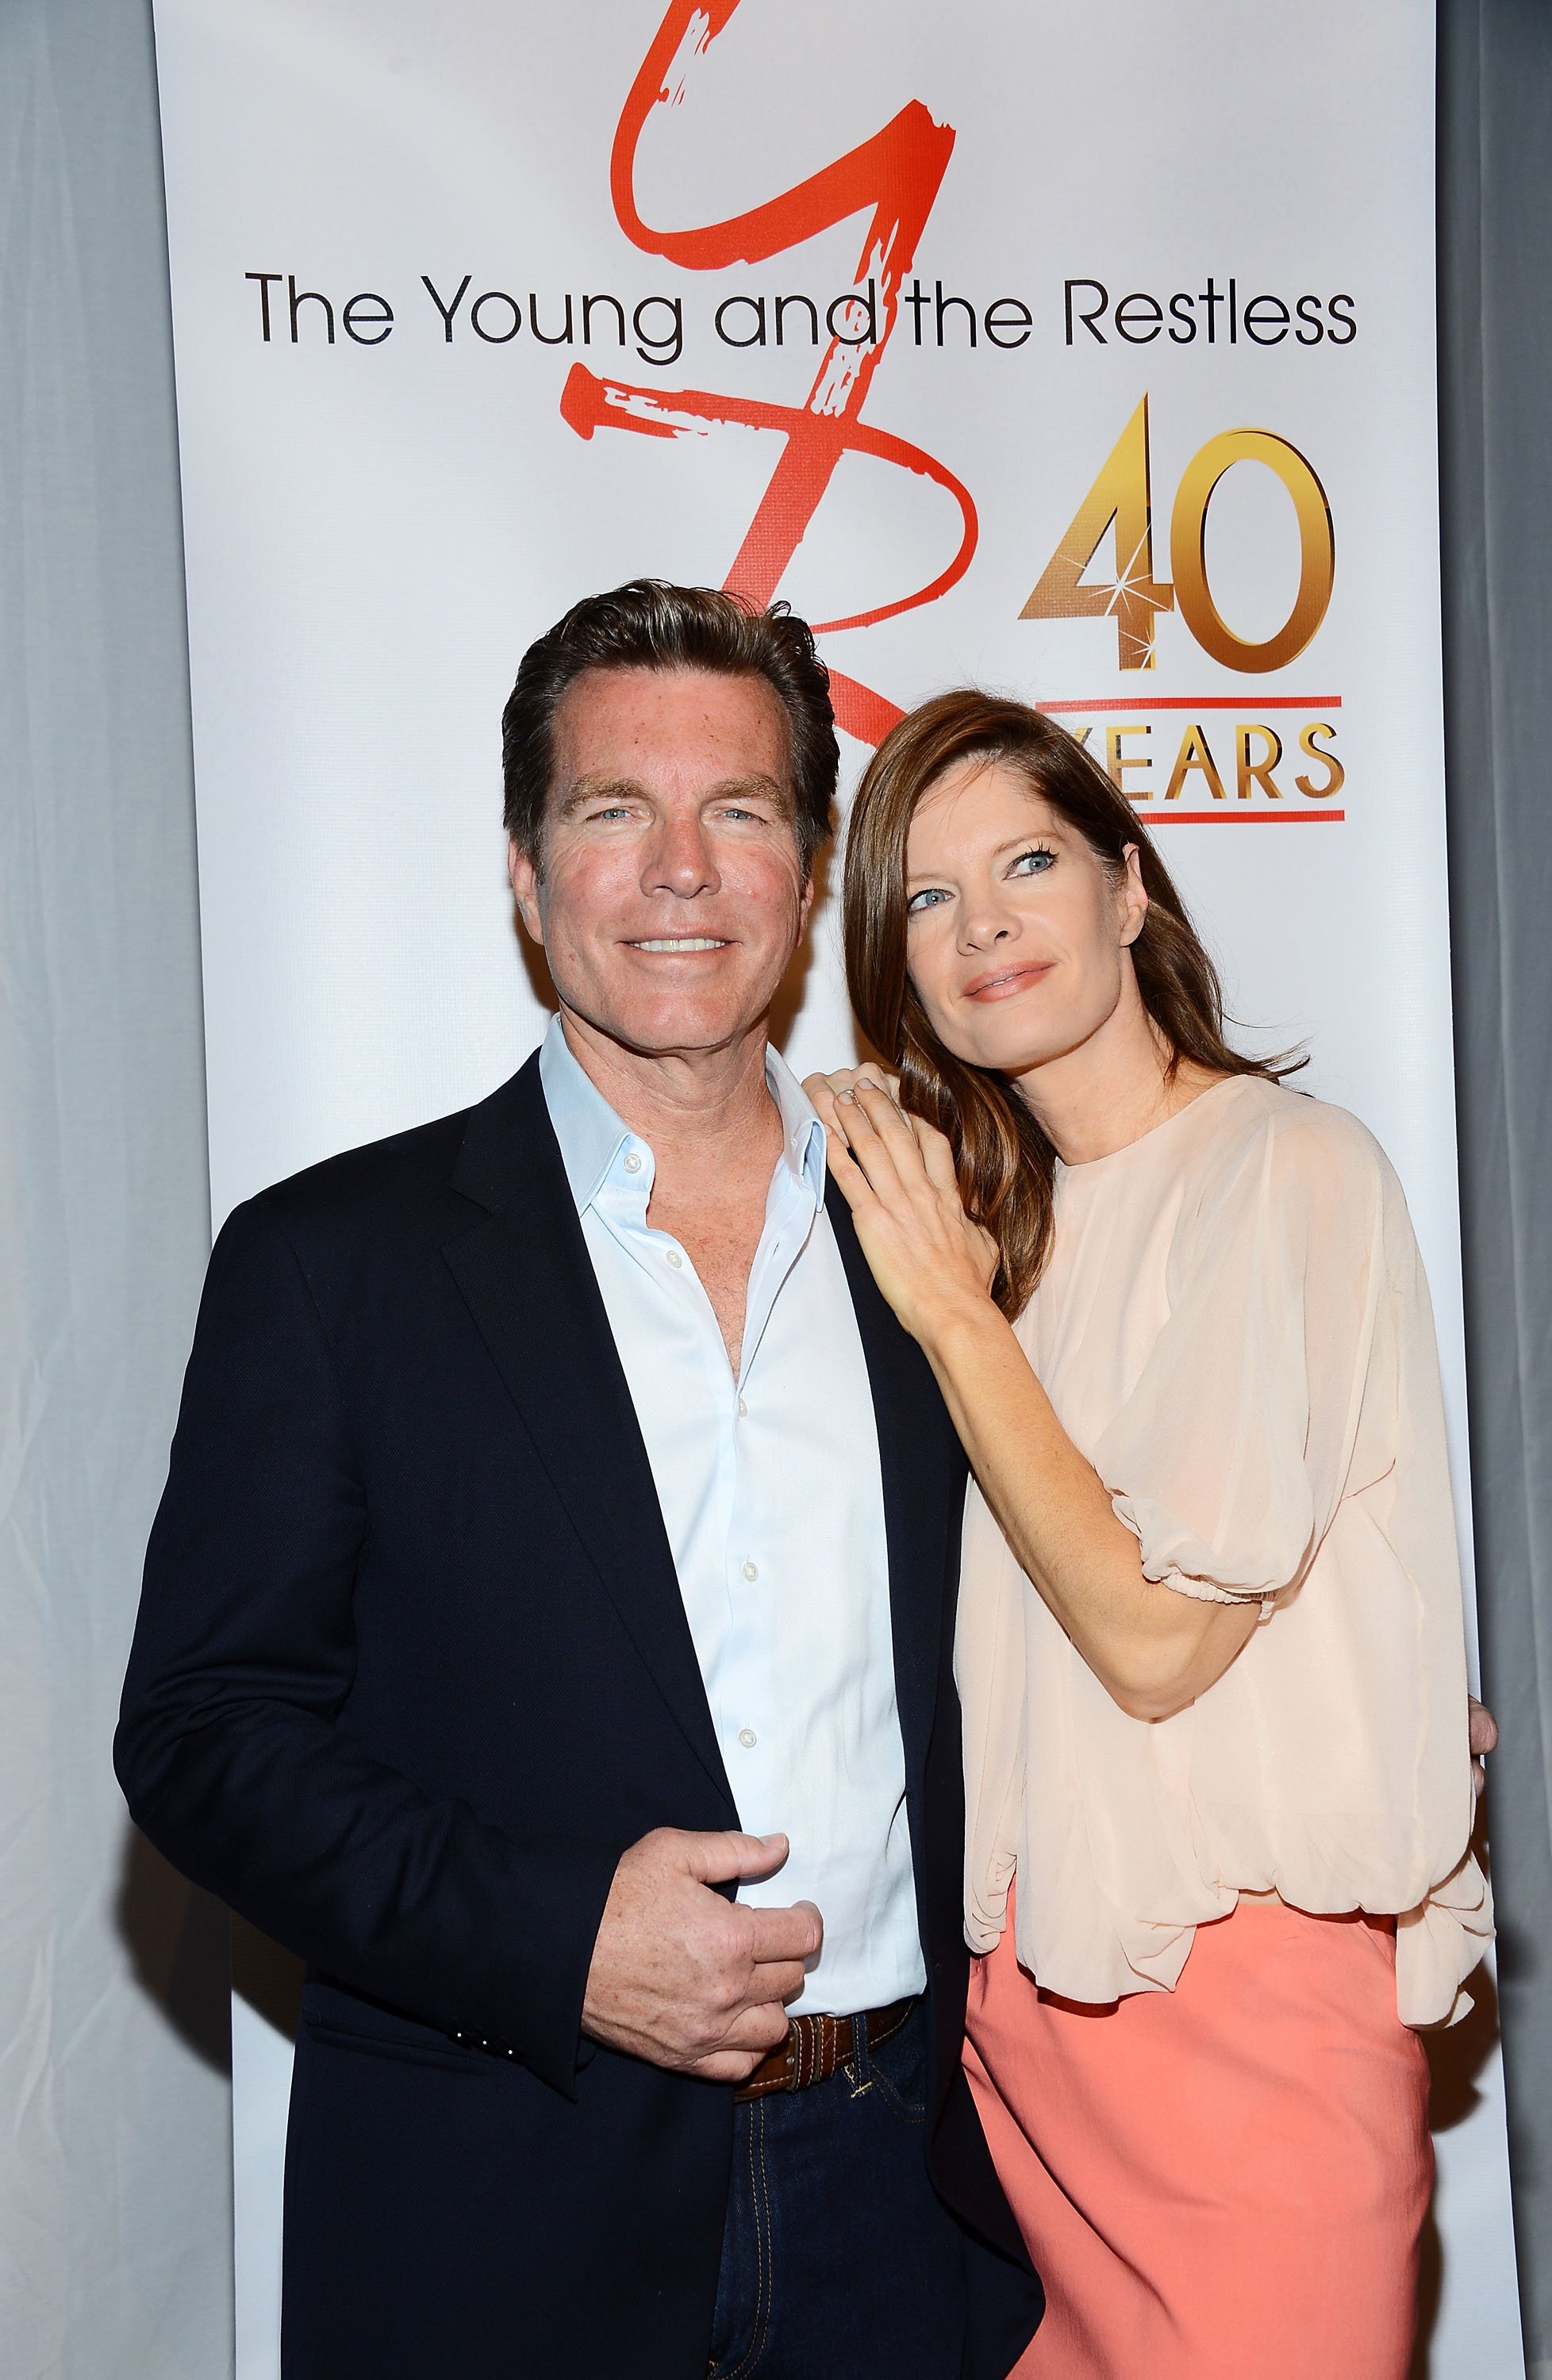 'The Young and the Restless' actors Peter Bergman and Michelle Stafford pose for a photo during the show's 40th anniversary celebration.